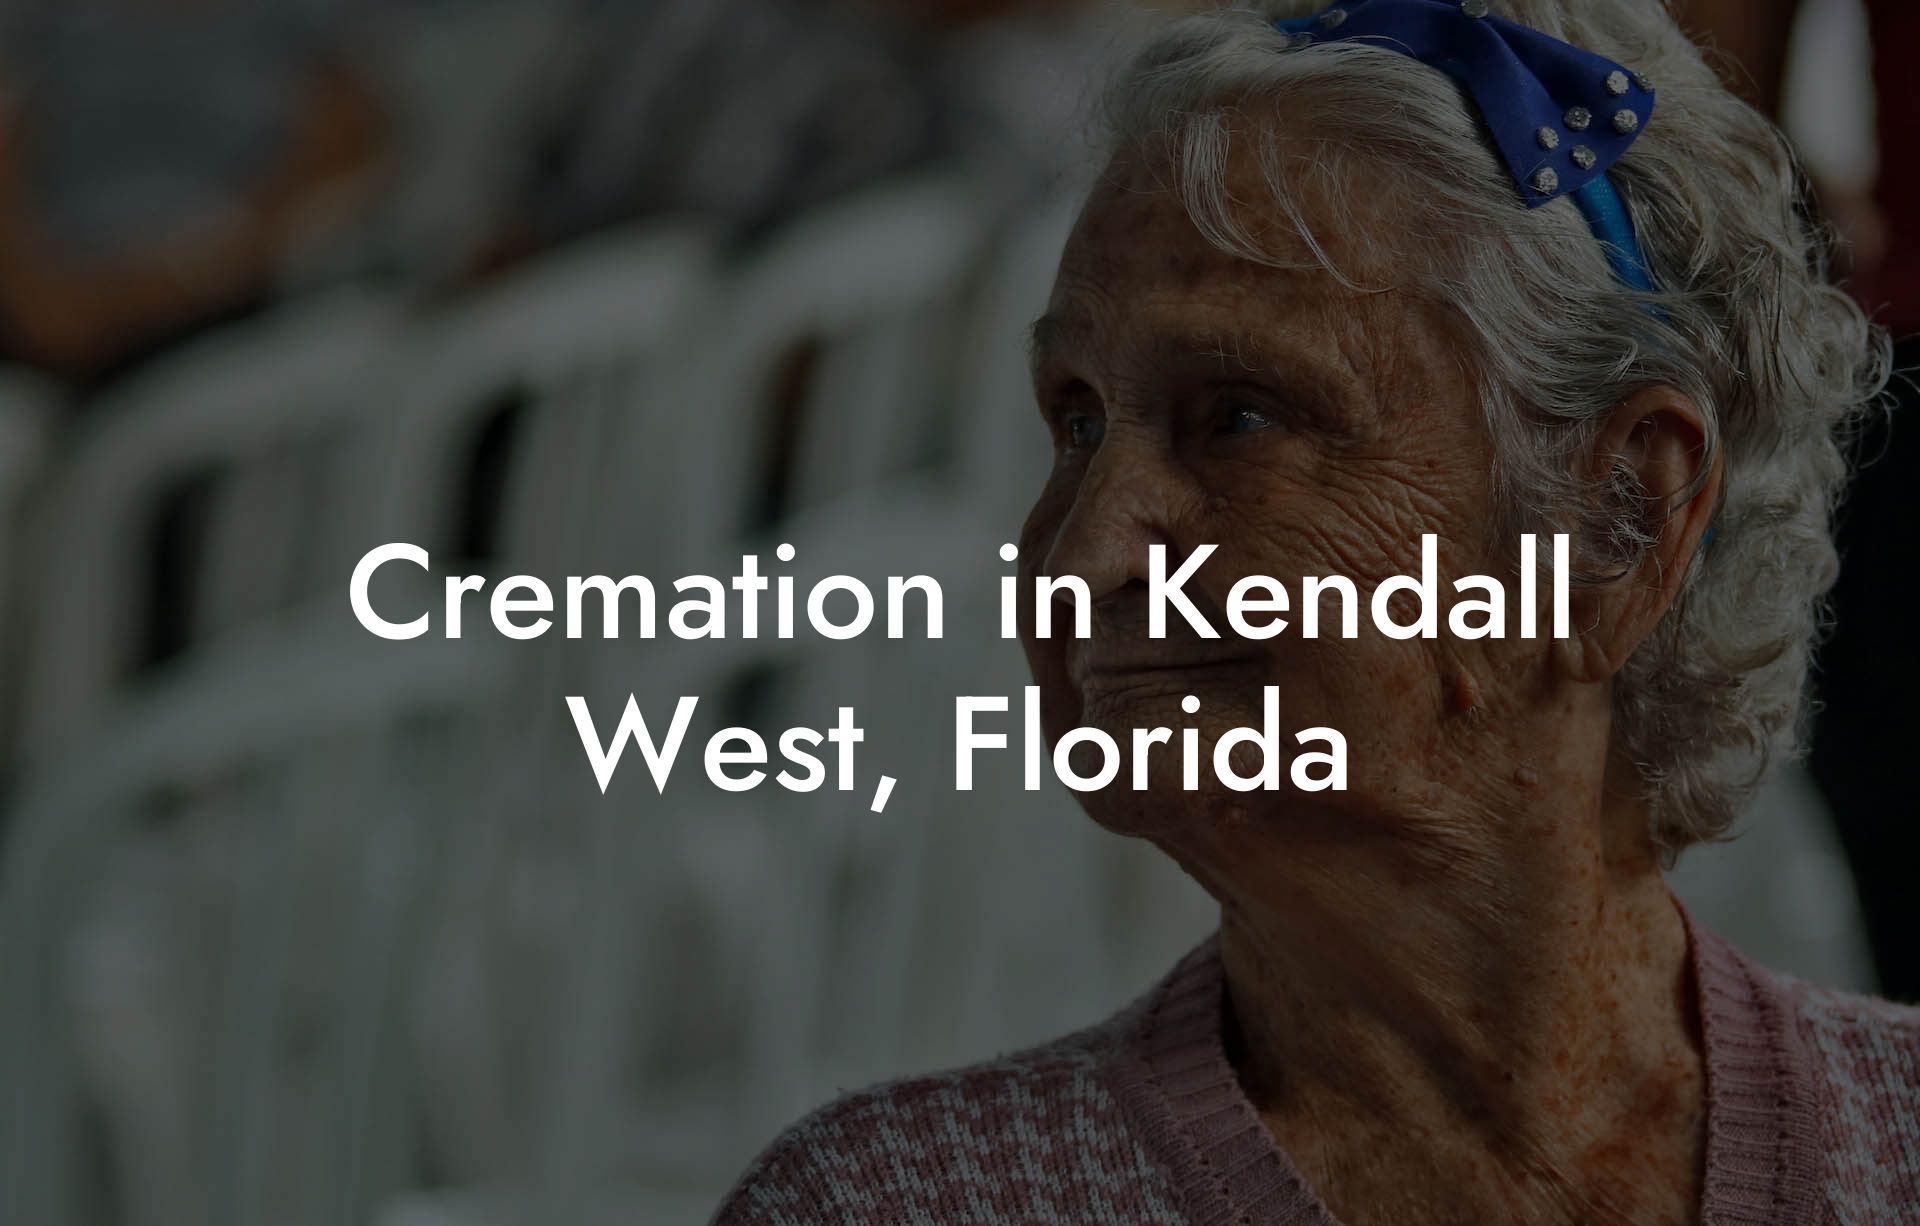 Cremation in Kendall West, Florida